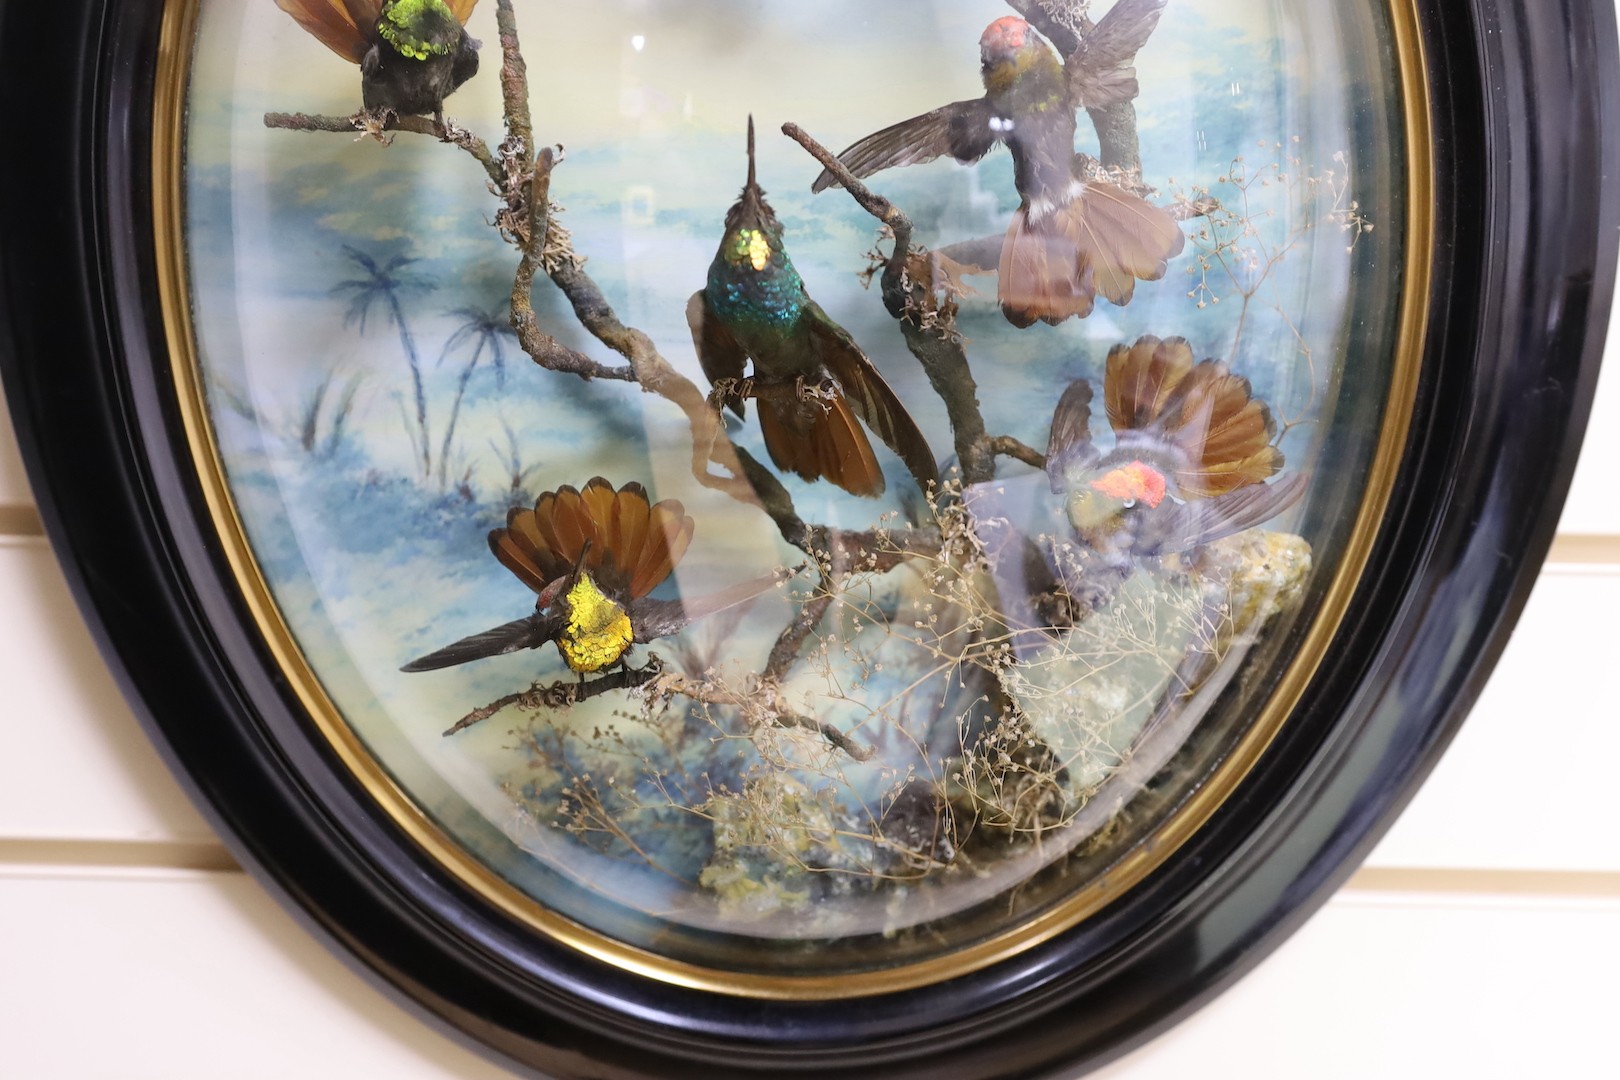 A Victorian taxidermic bouquet of humming birds in convex oval frame - approx 60cm high